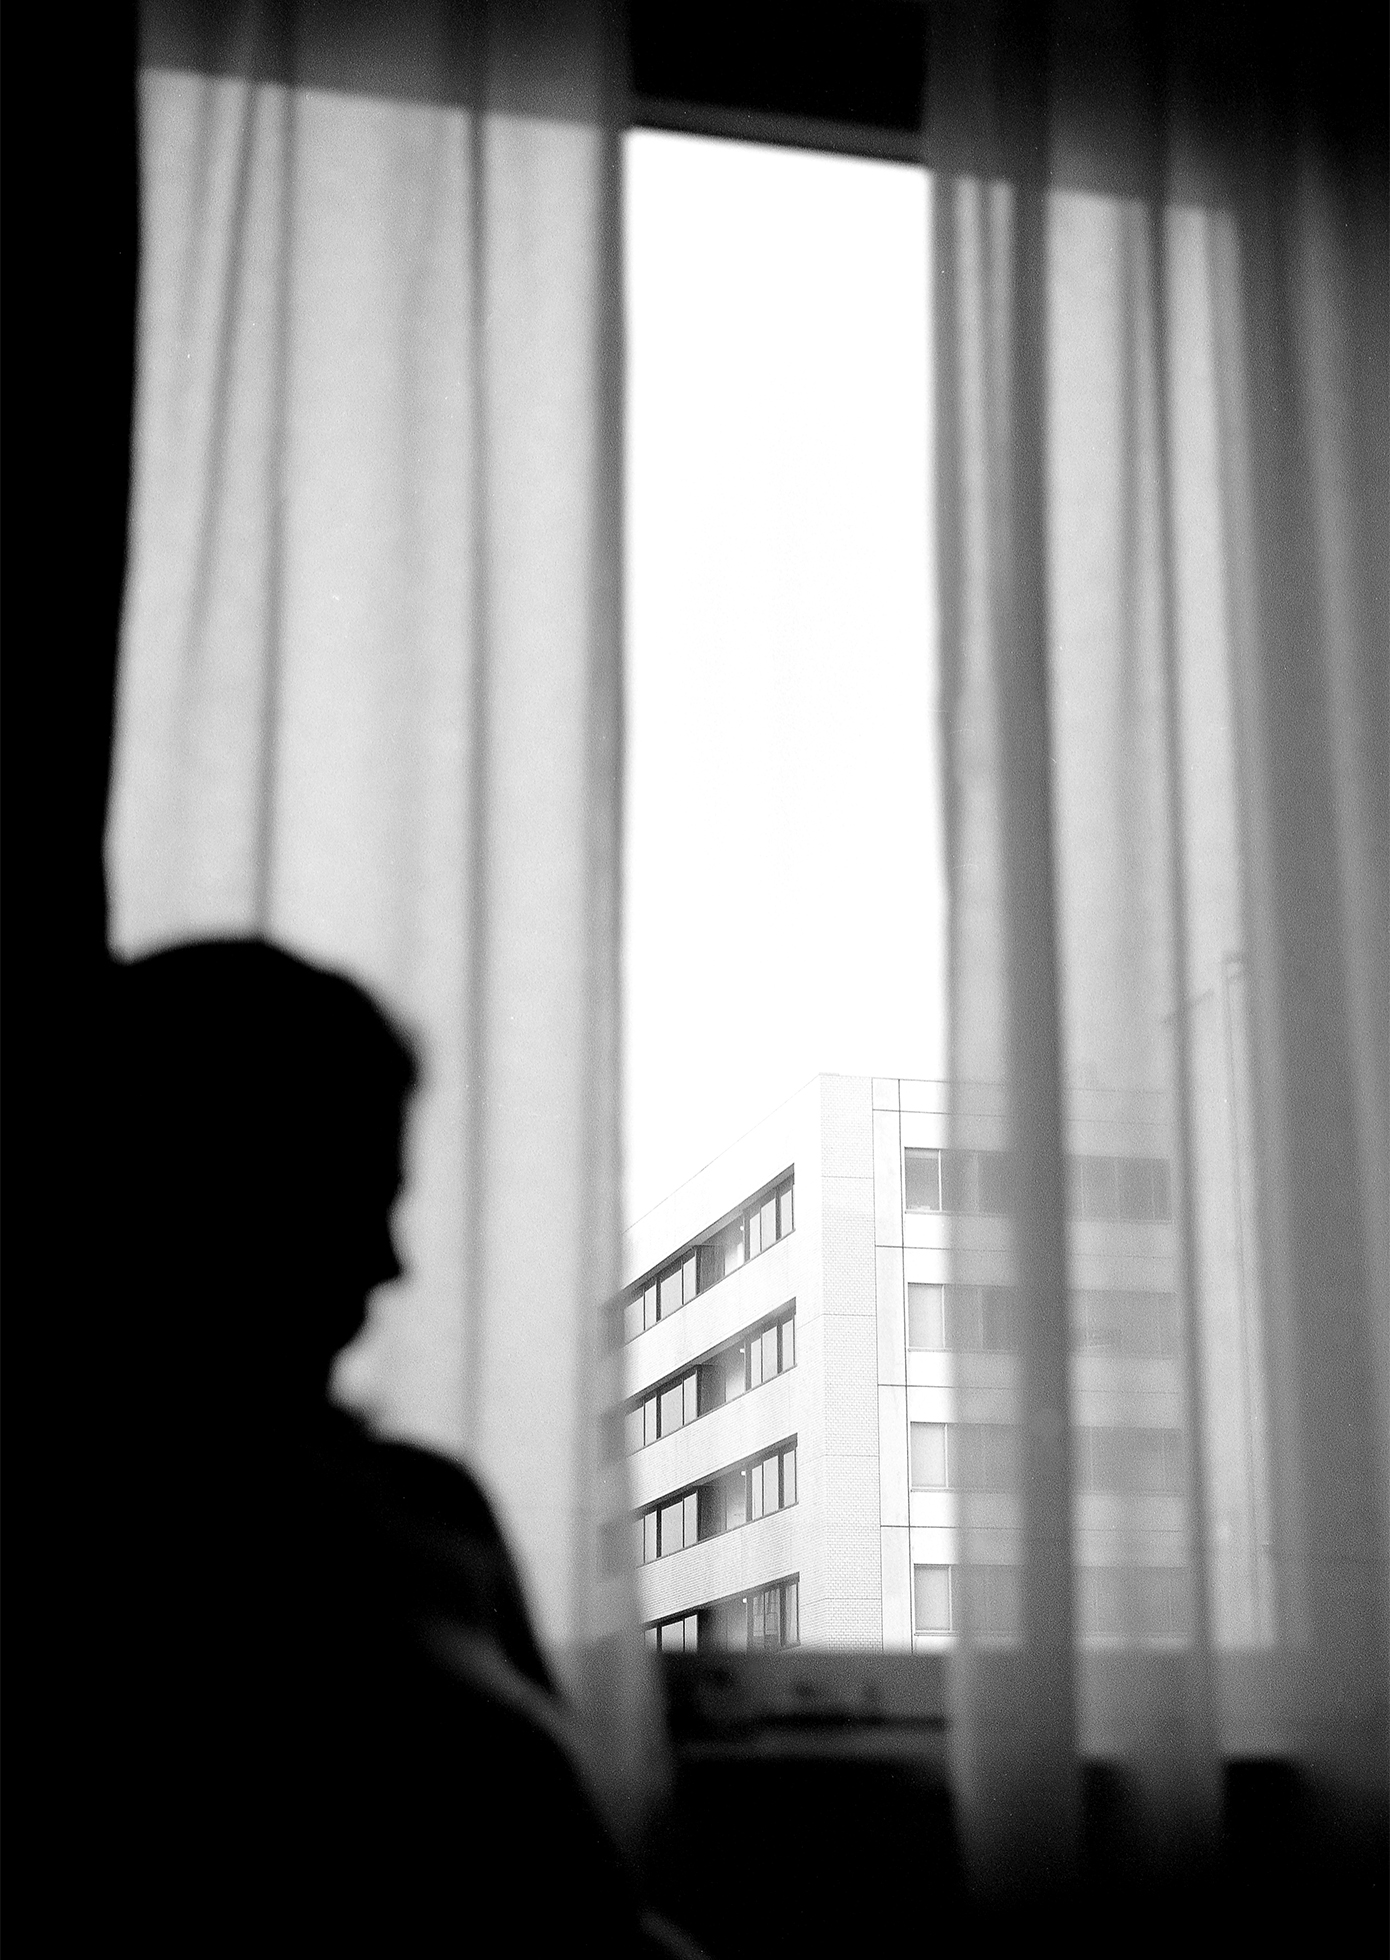 A woman sits by a large, curtained window that looks out on the top floors of a high-rise building. The woman is a blurry, dark silhouette against the light coming through the window.